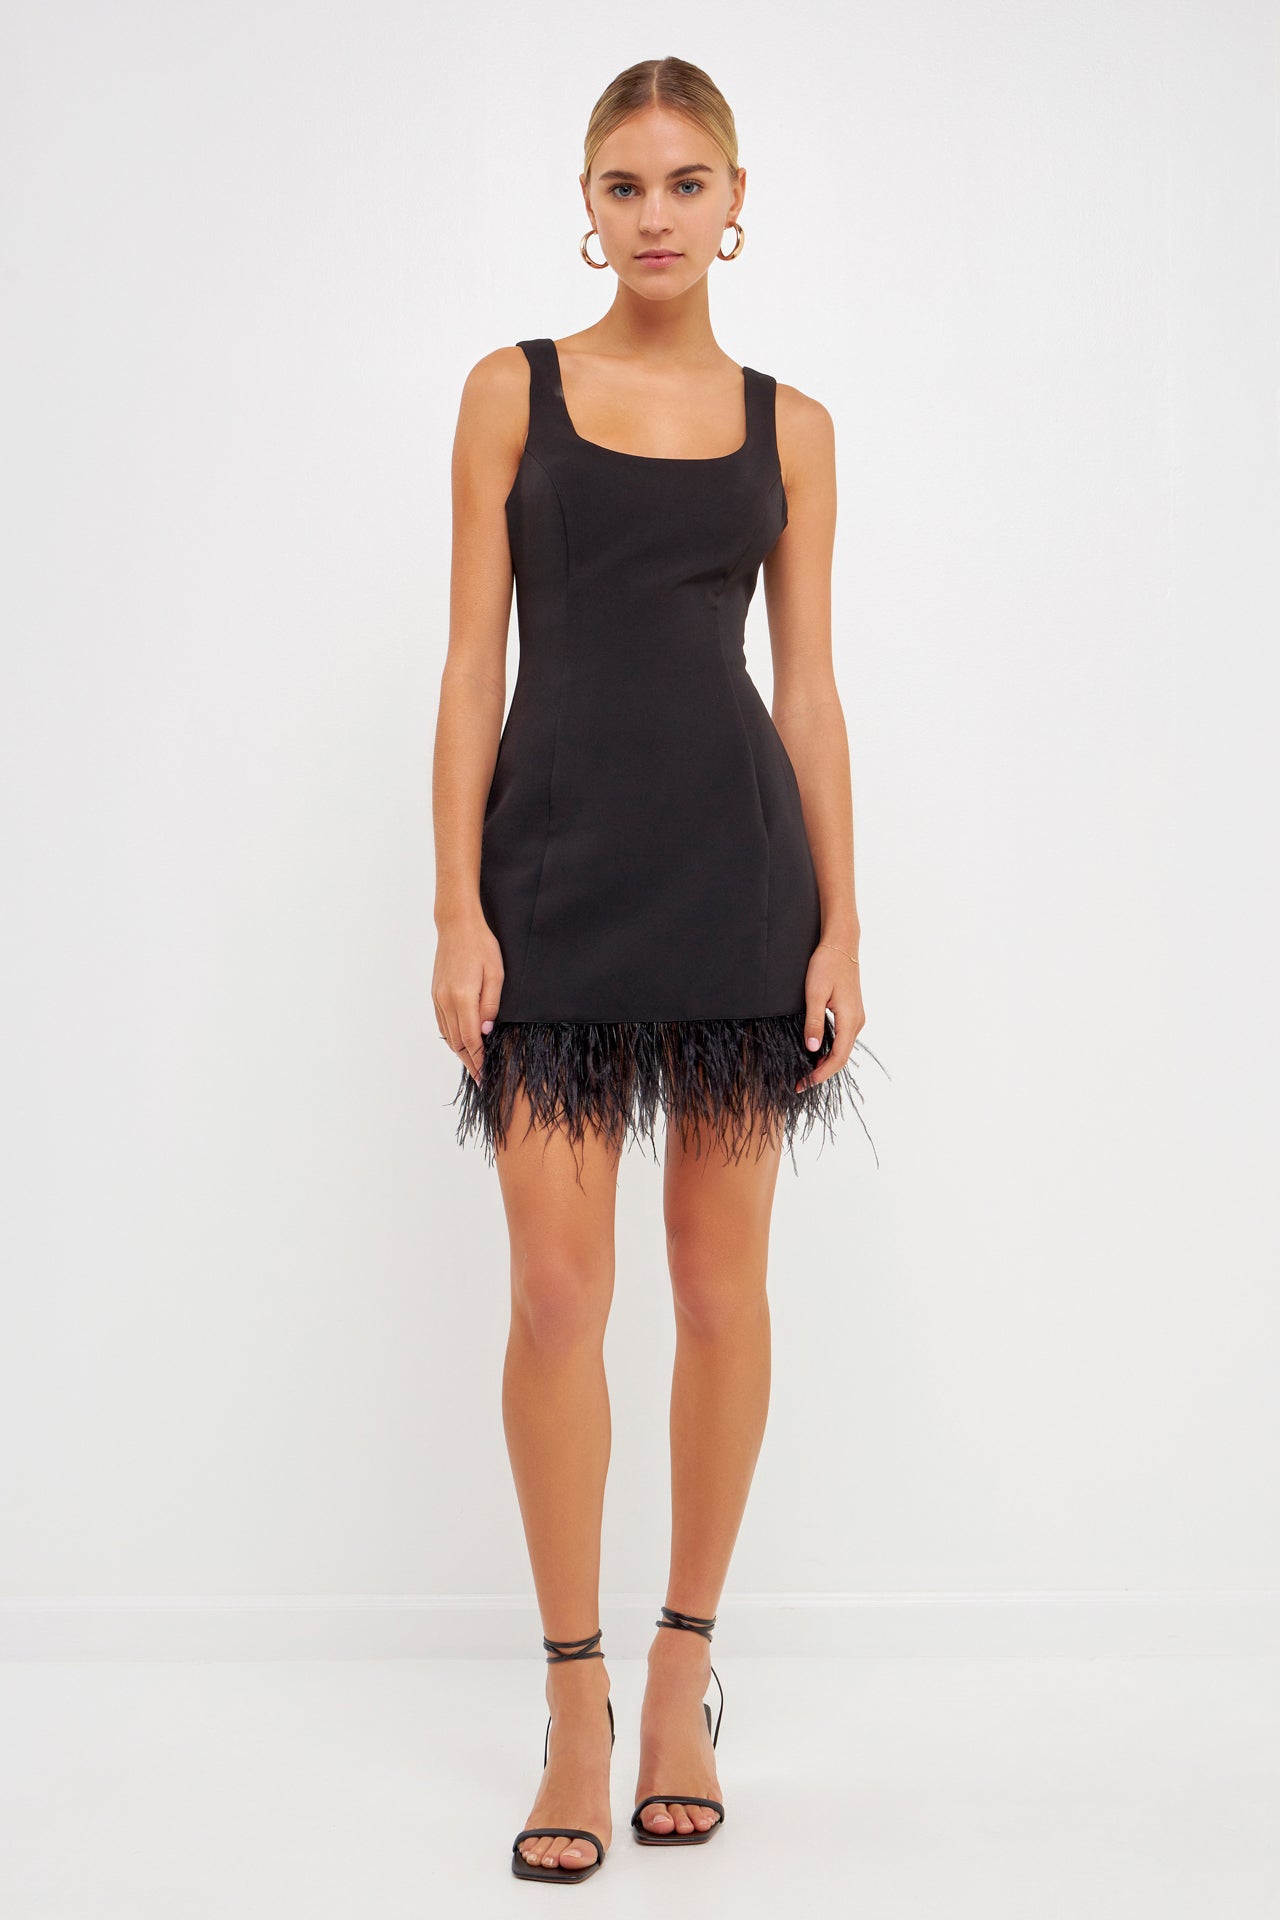 ENDLESS ROSE - Feather Trim Mini Dress - DRESSES available at Objectrare